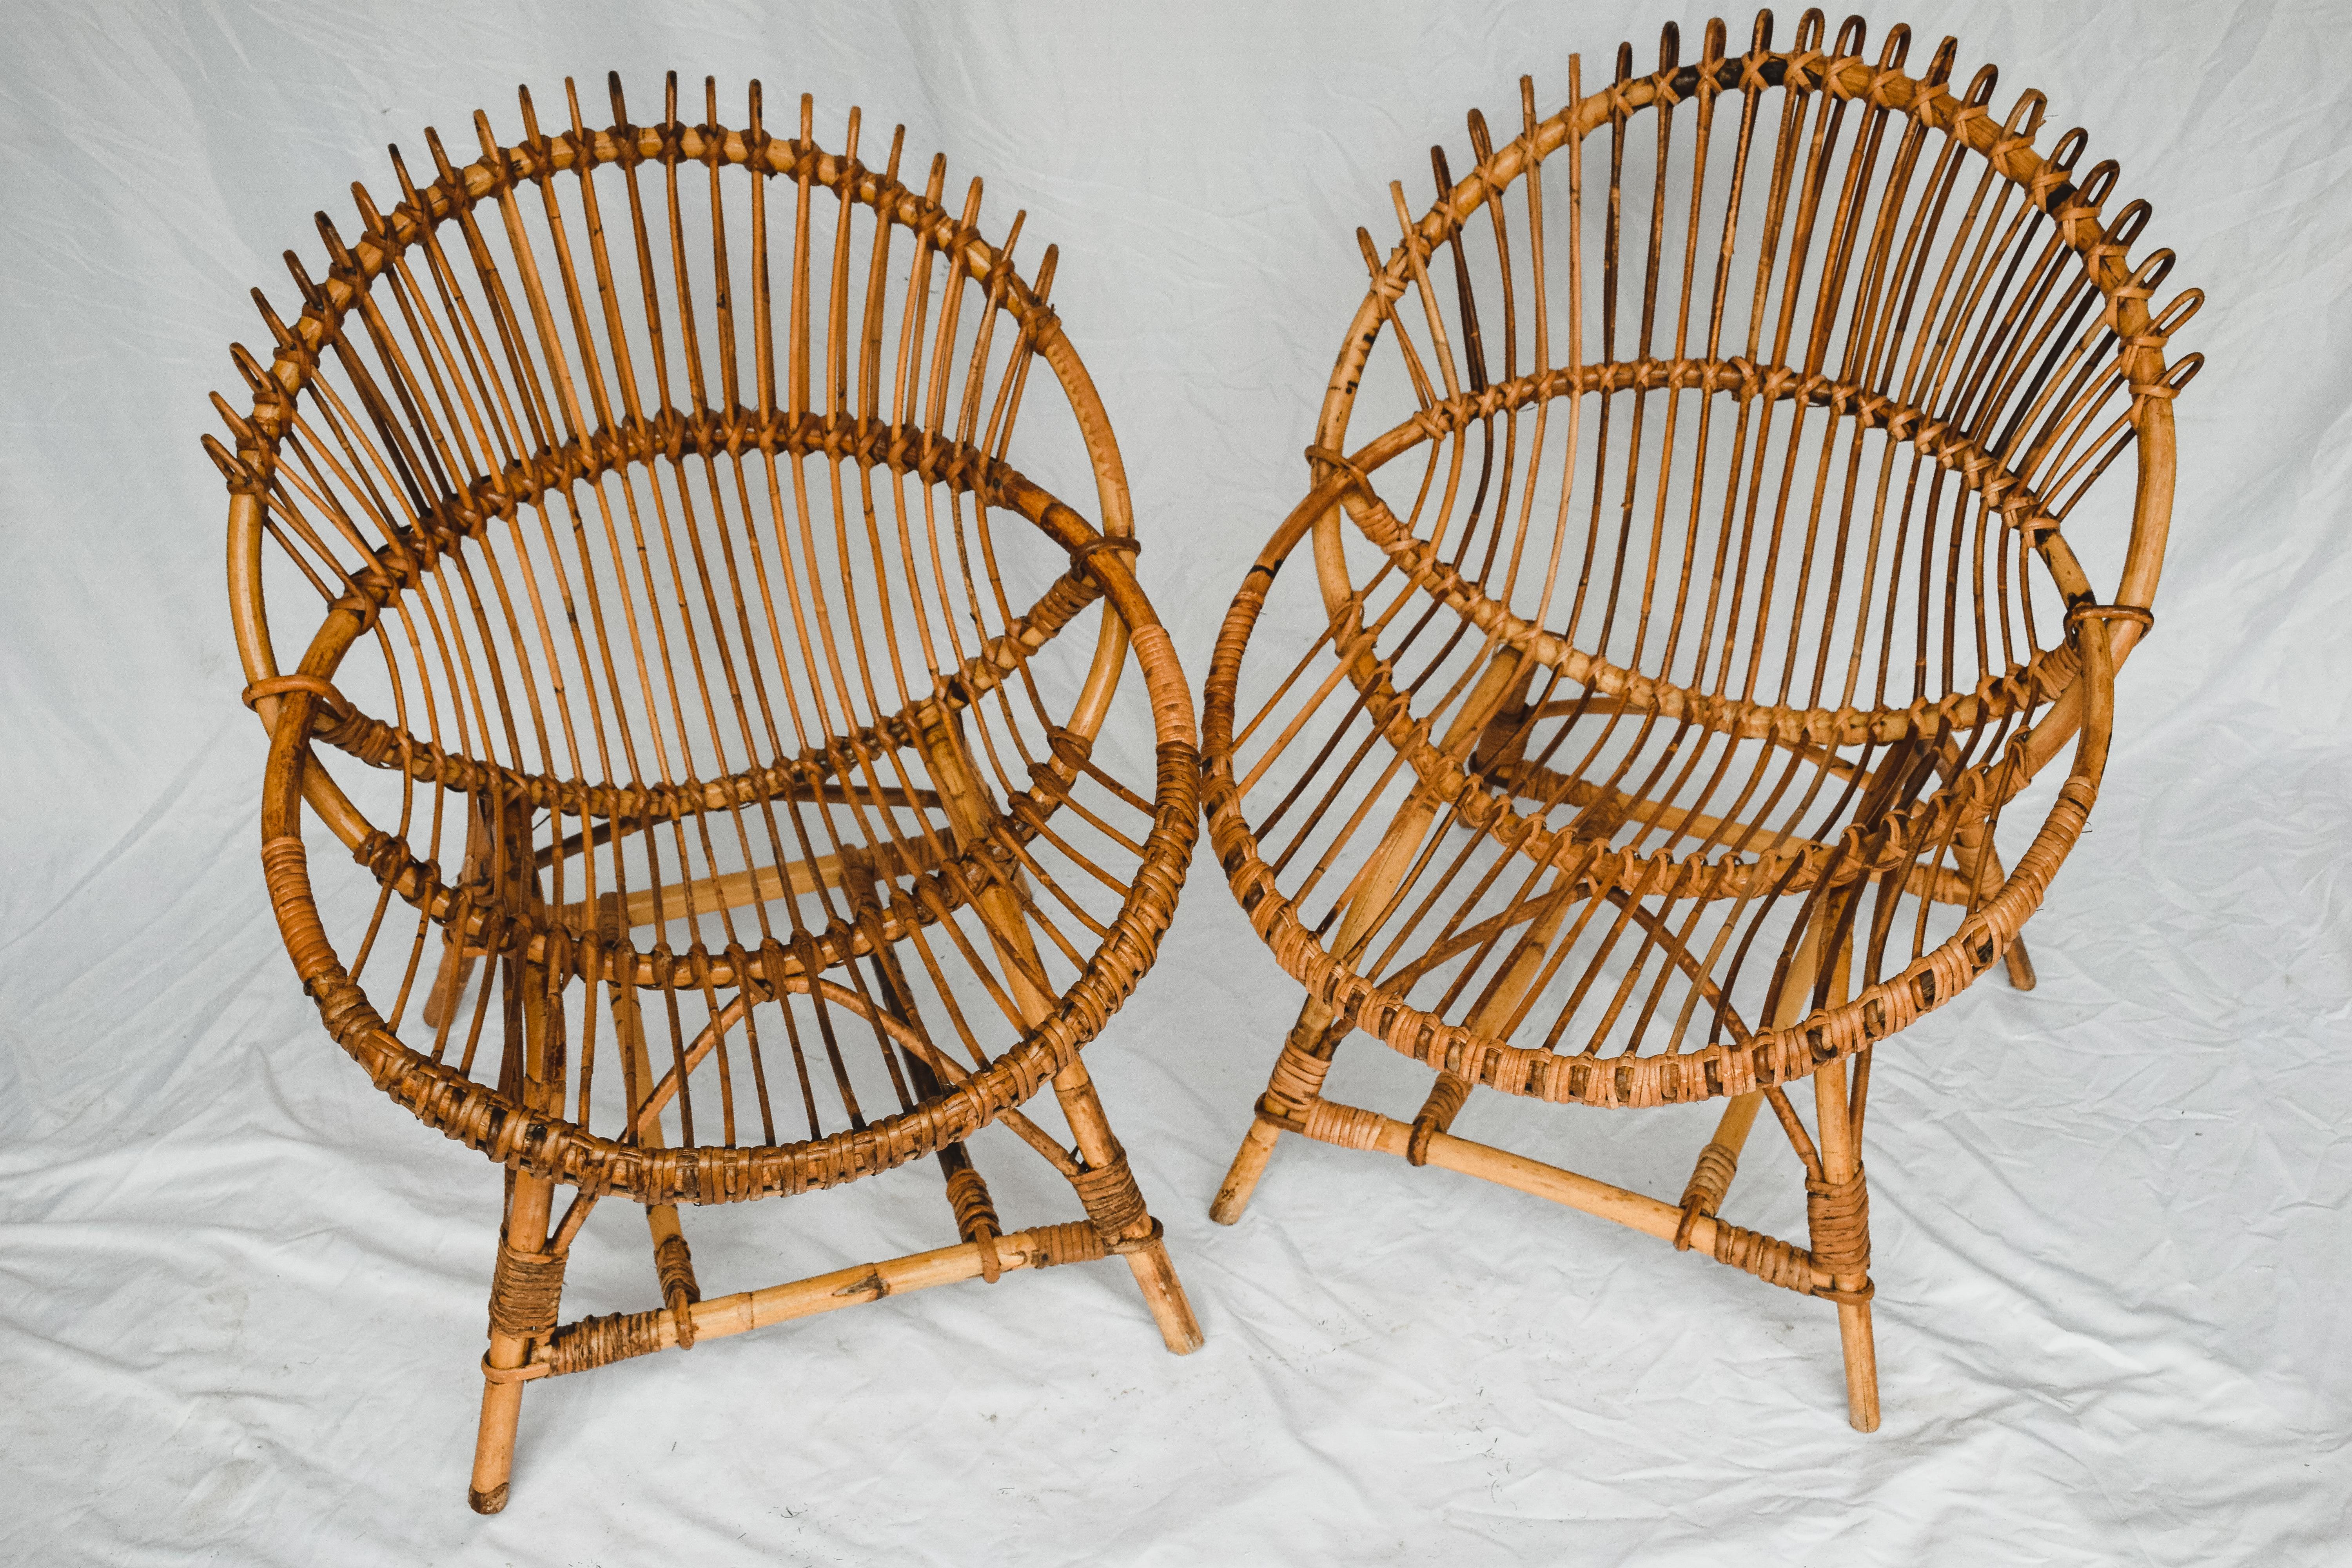 Midcentury Bamboo Franco Albini Style Lounge Chairs. In Original Condition with. Amazing mid century rattan shell-shaped armchair. These pieces were produced in Italy during 1950s and the design is attributed to Franco Albini. The uniqueness of this